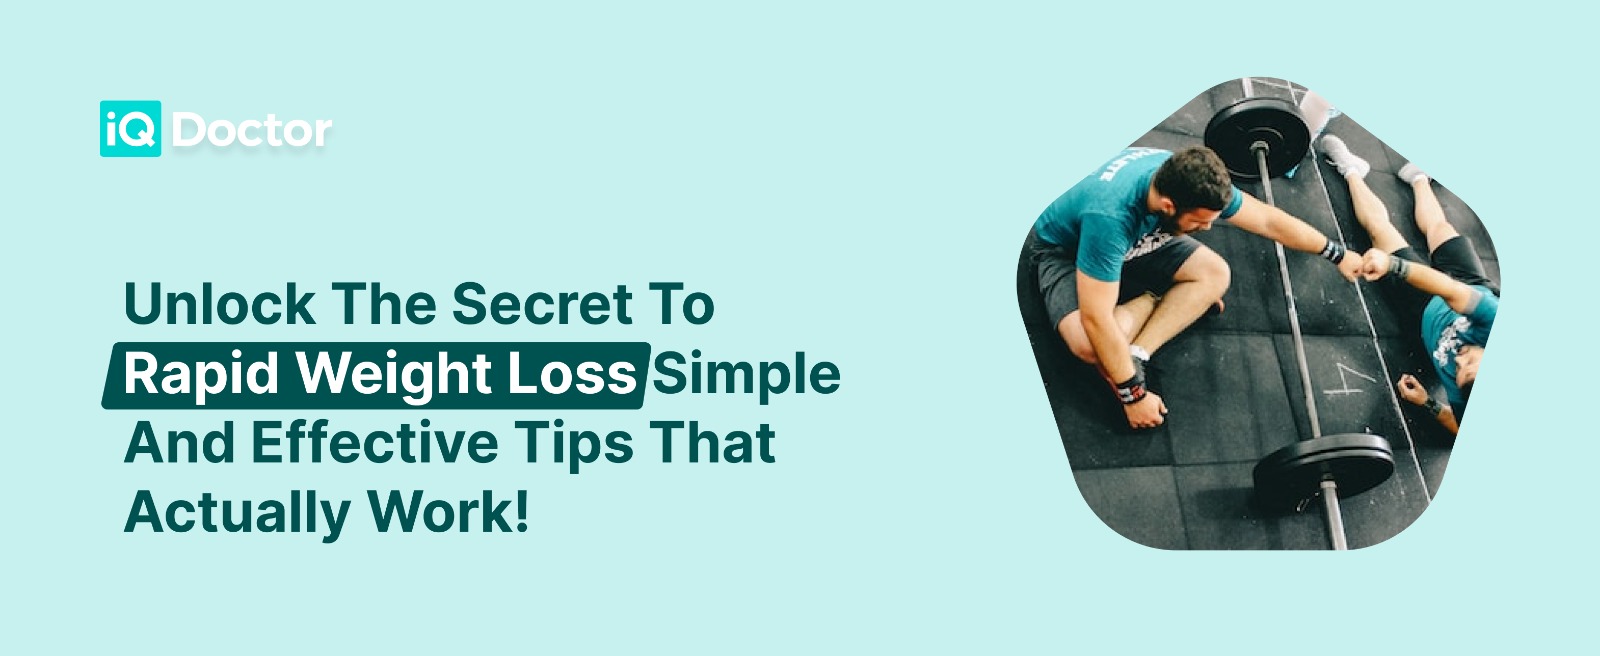 Unlock the Secret to Rapid Weight Loss Simple and Effective Tips That Actually Work